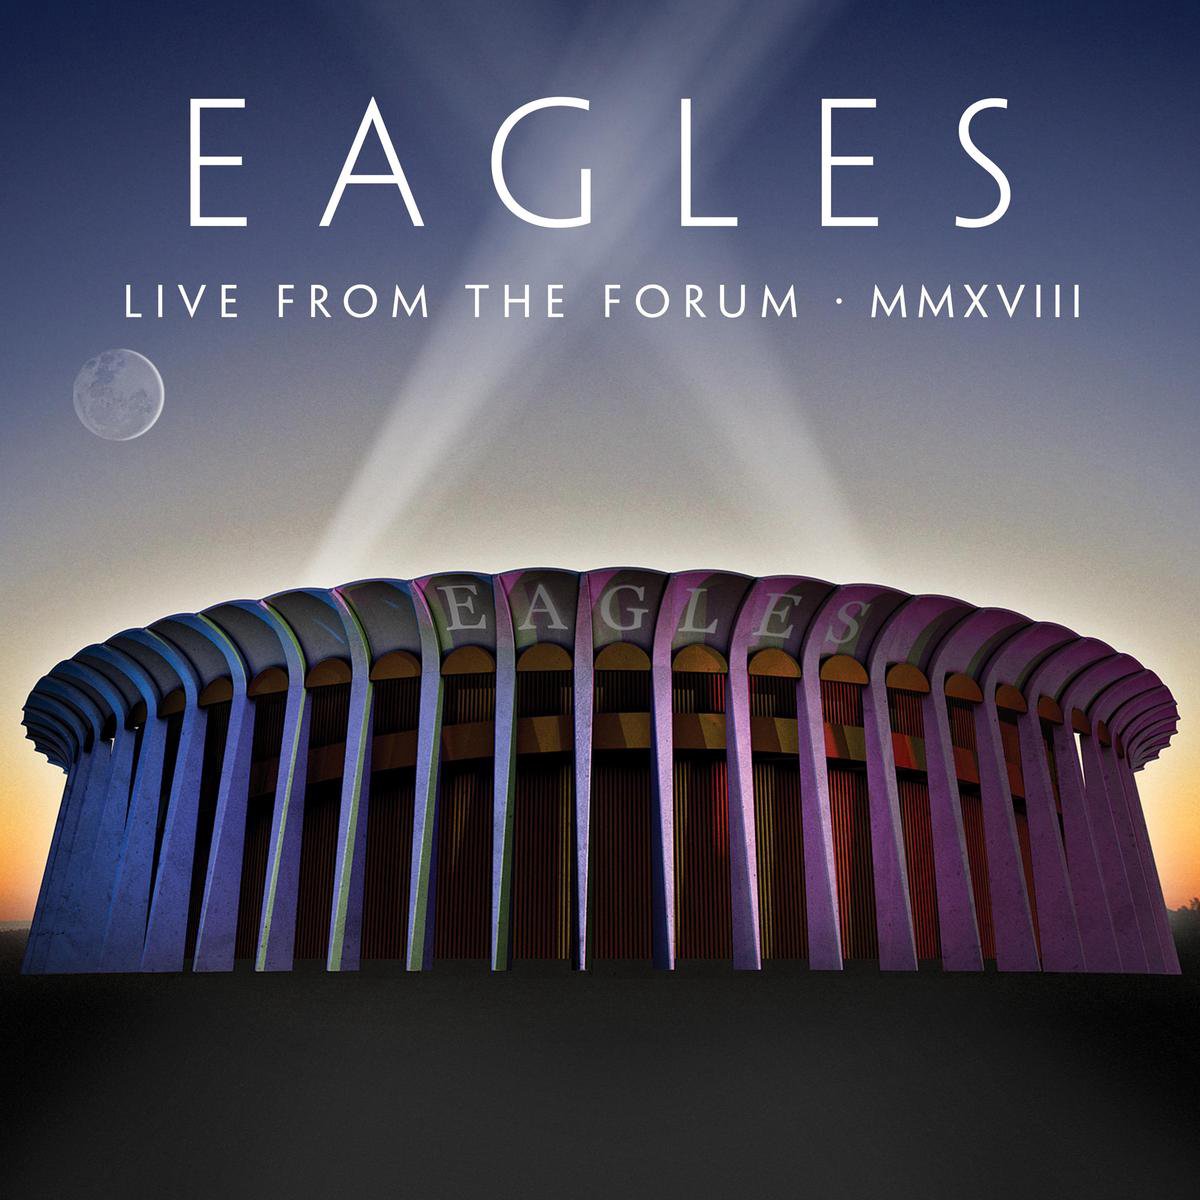 Live From The Forum (2CD+Blu-ray) - Eagles